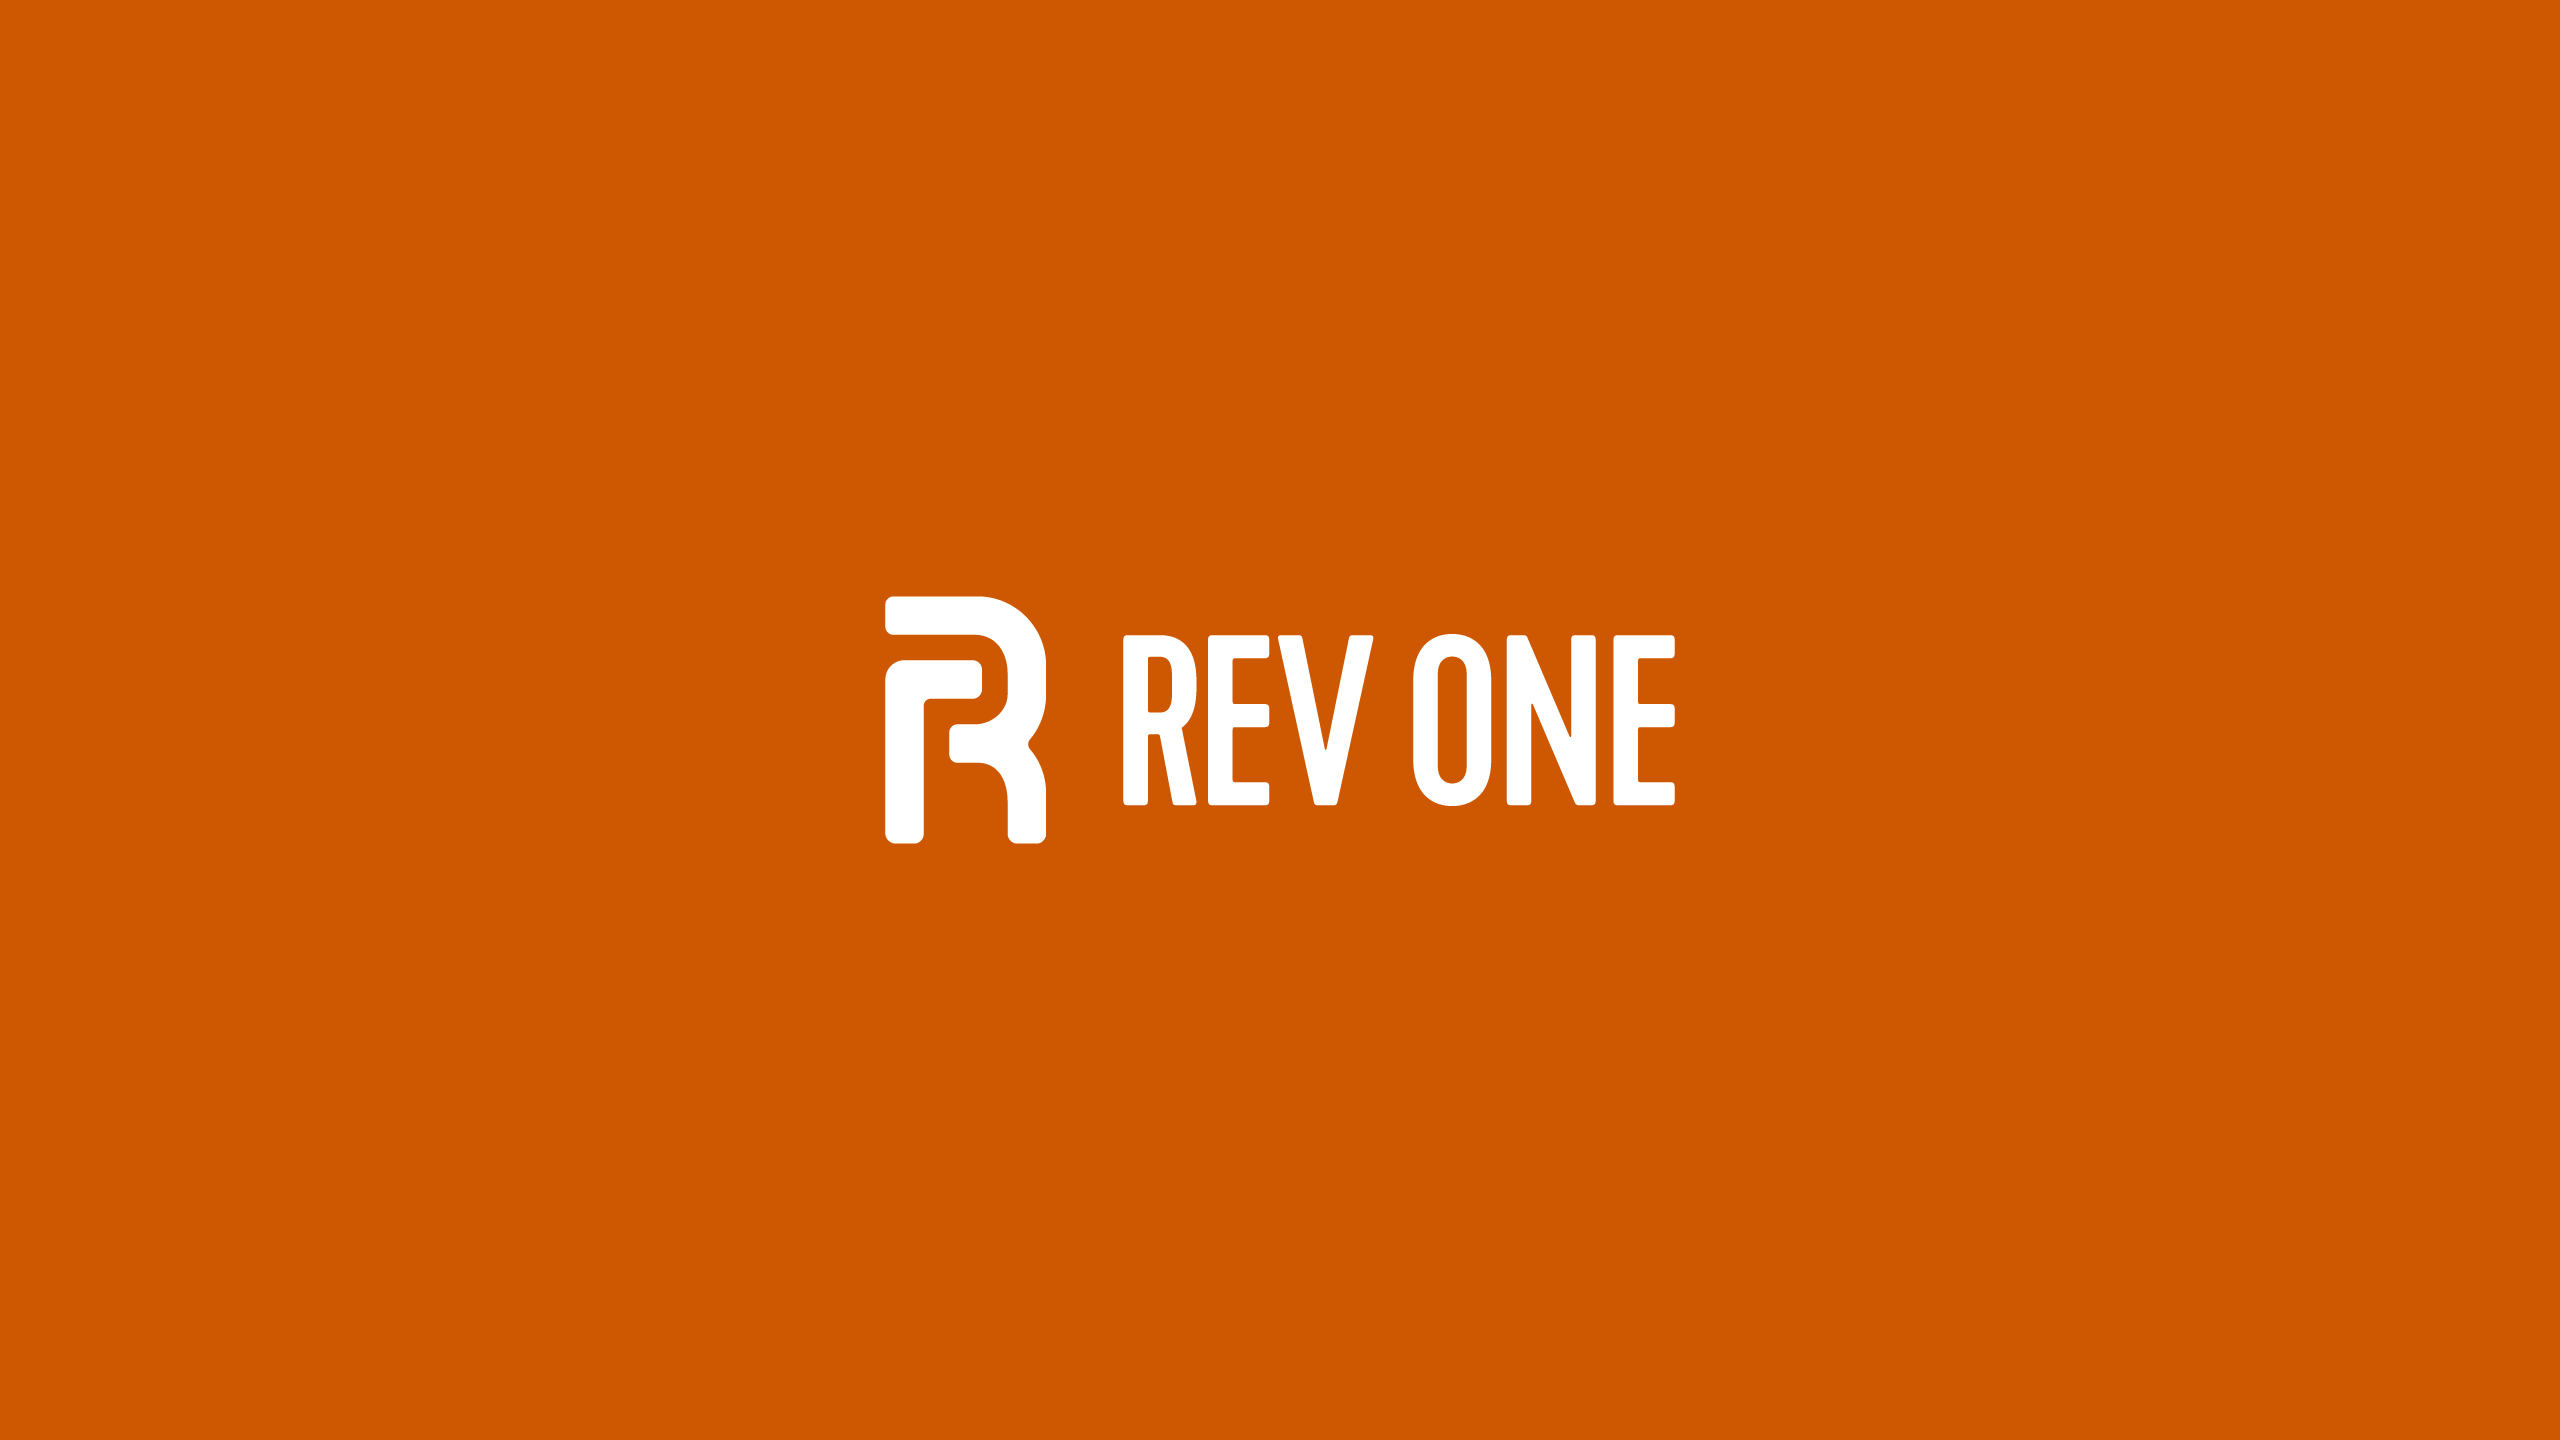 PROJECT_IN-LINE_03_REVONE_01-10